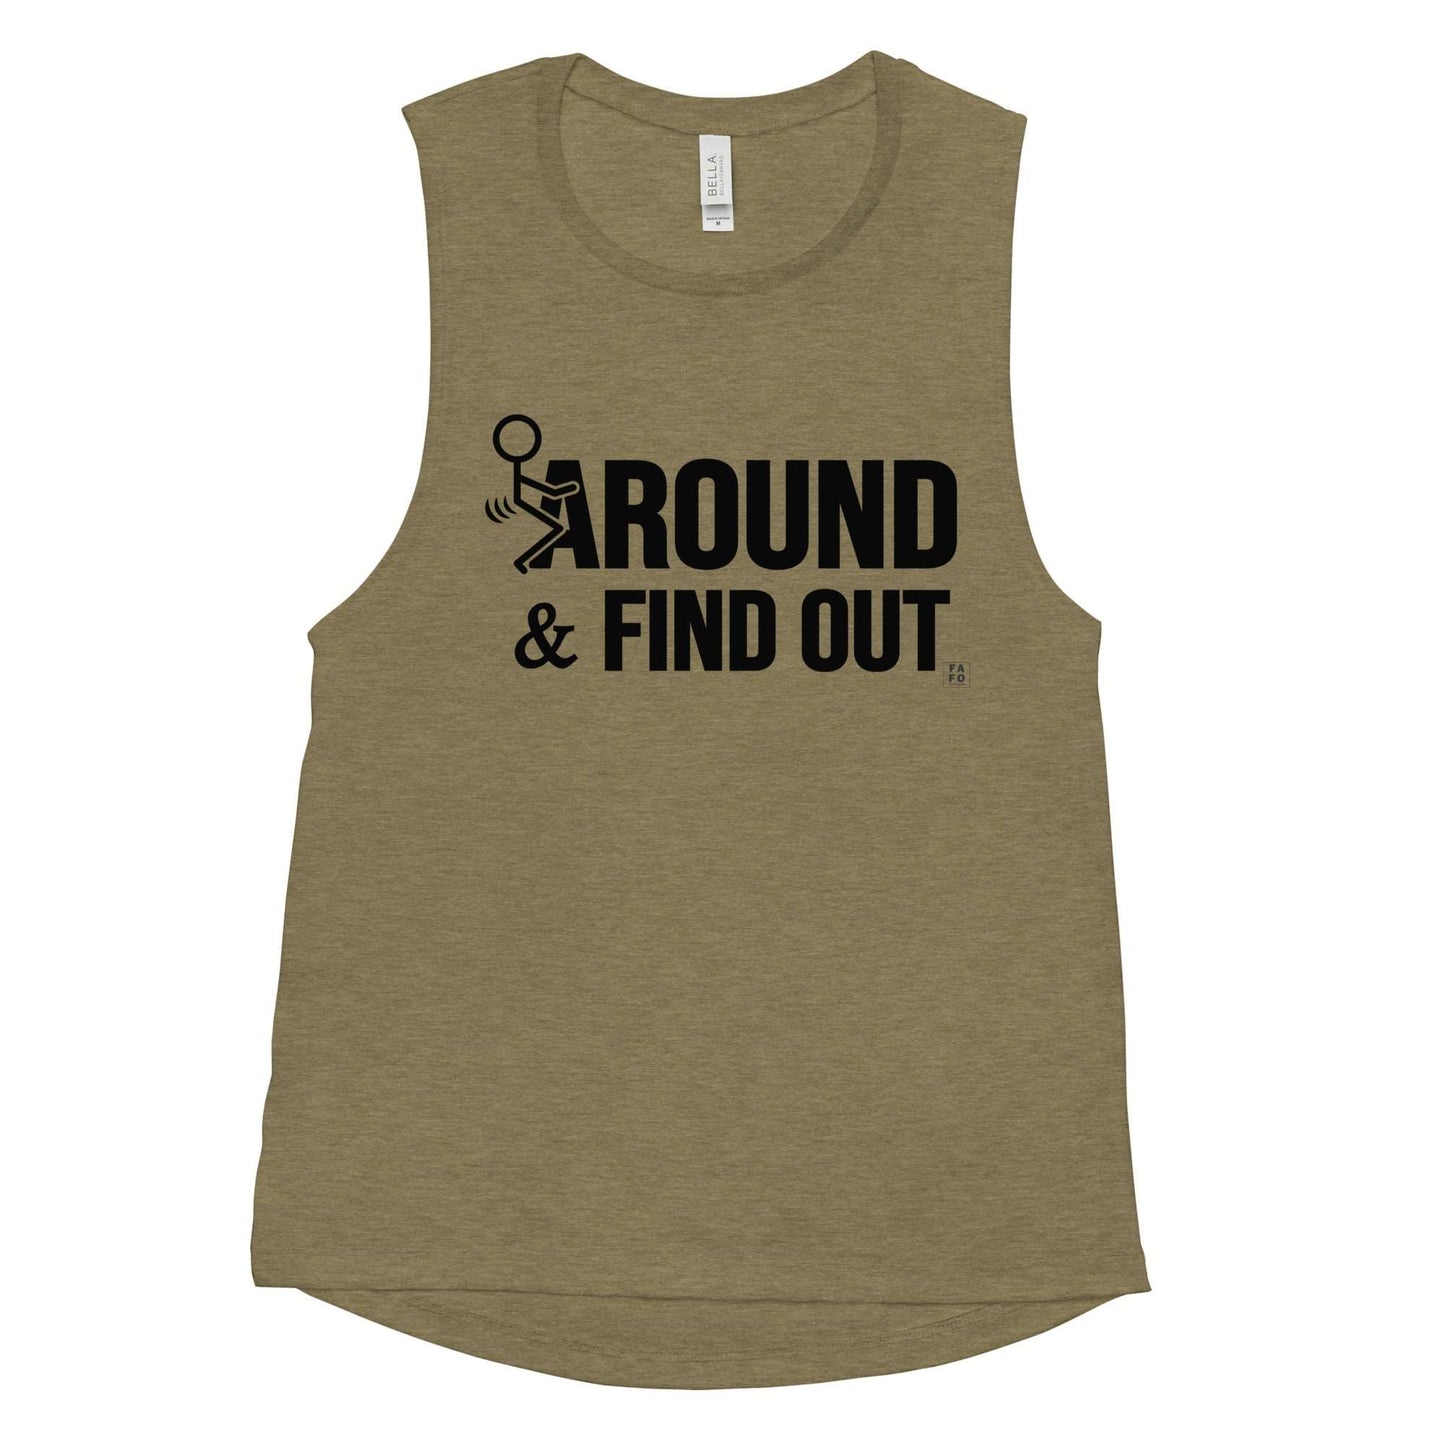 Bella Muscle Tank - F*k Around and Find Out